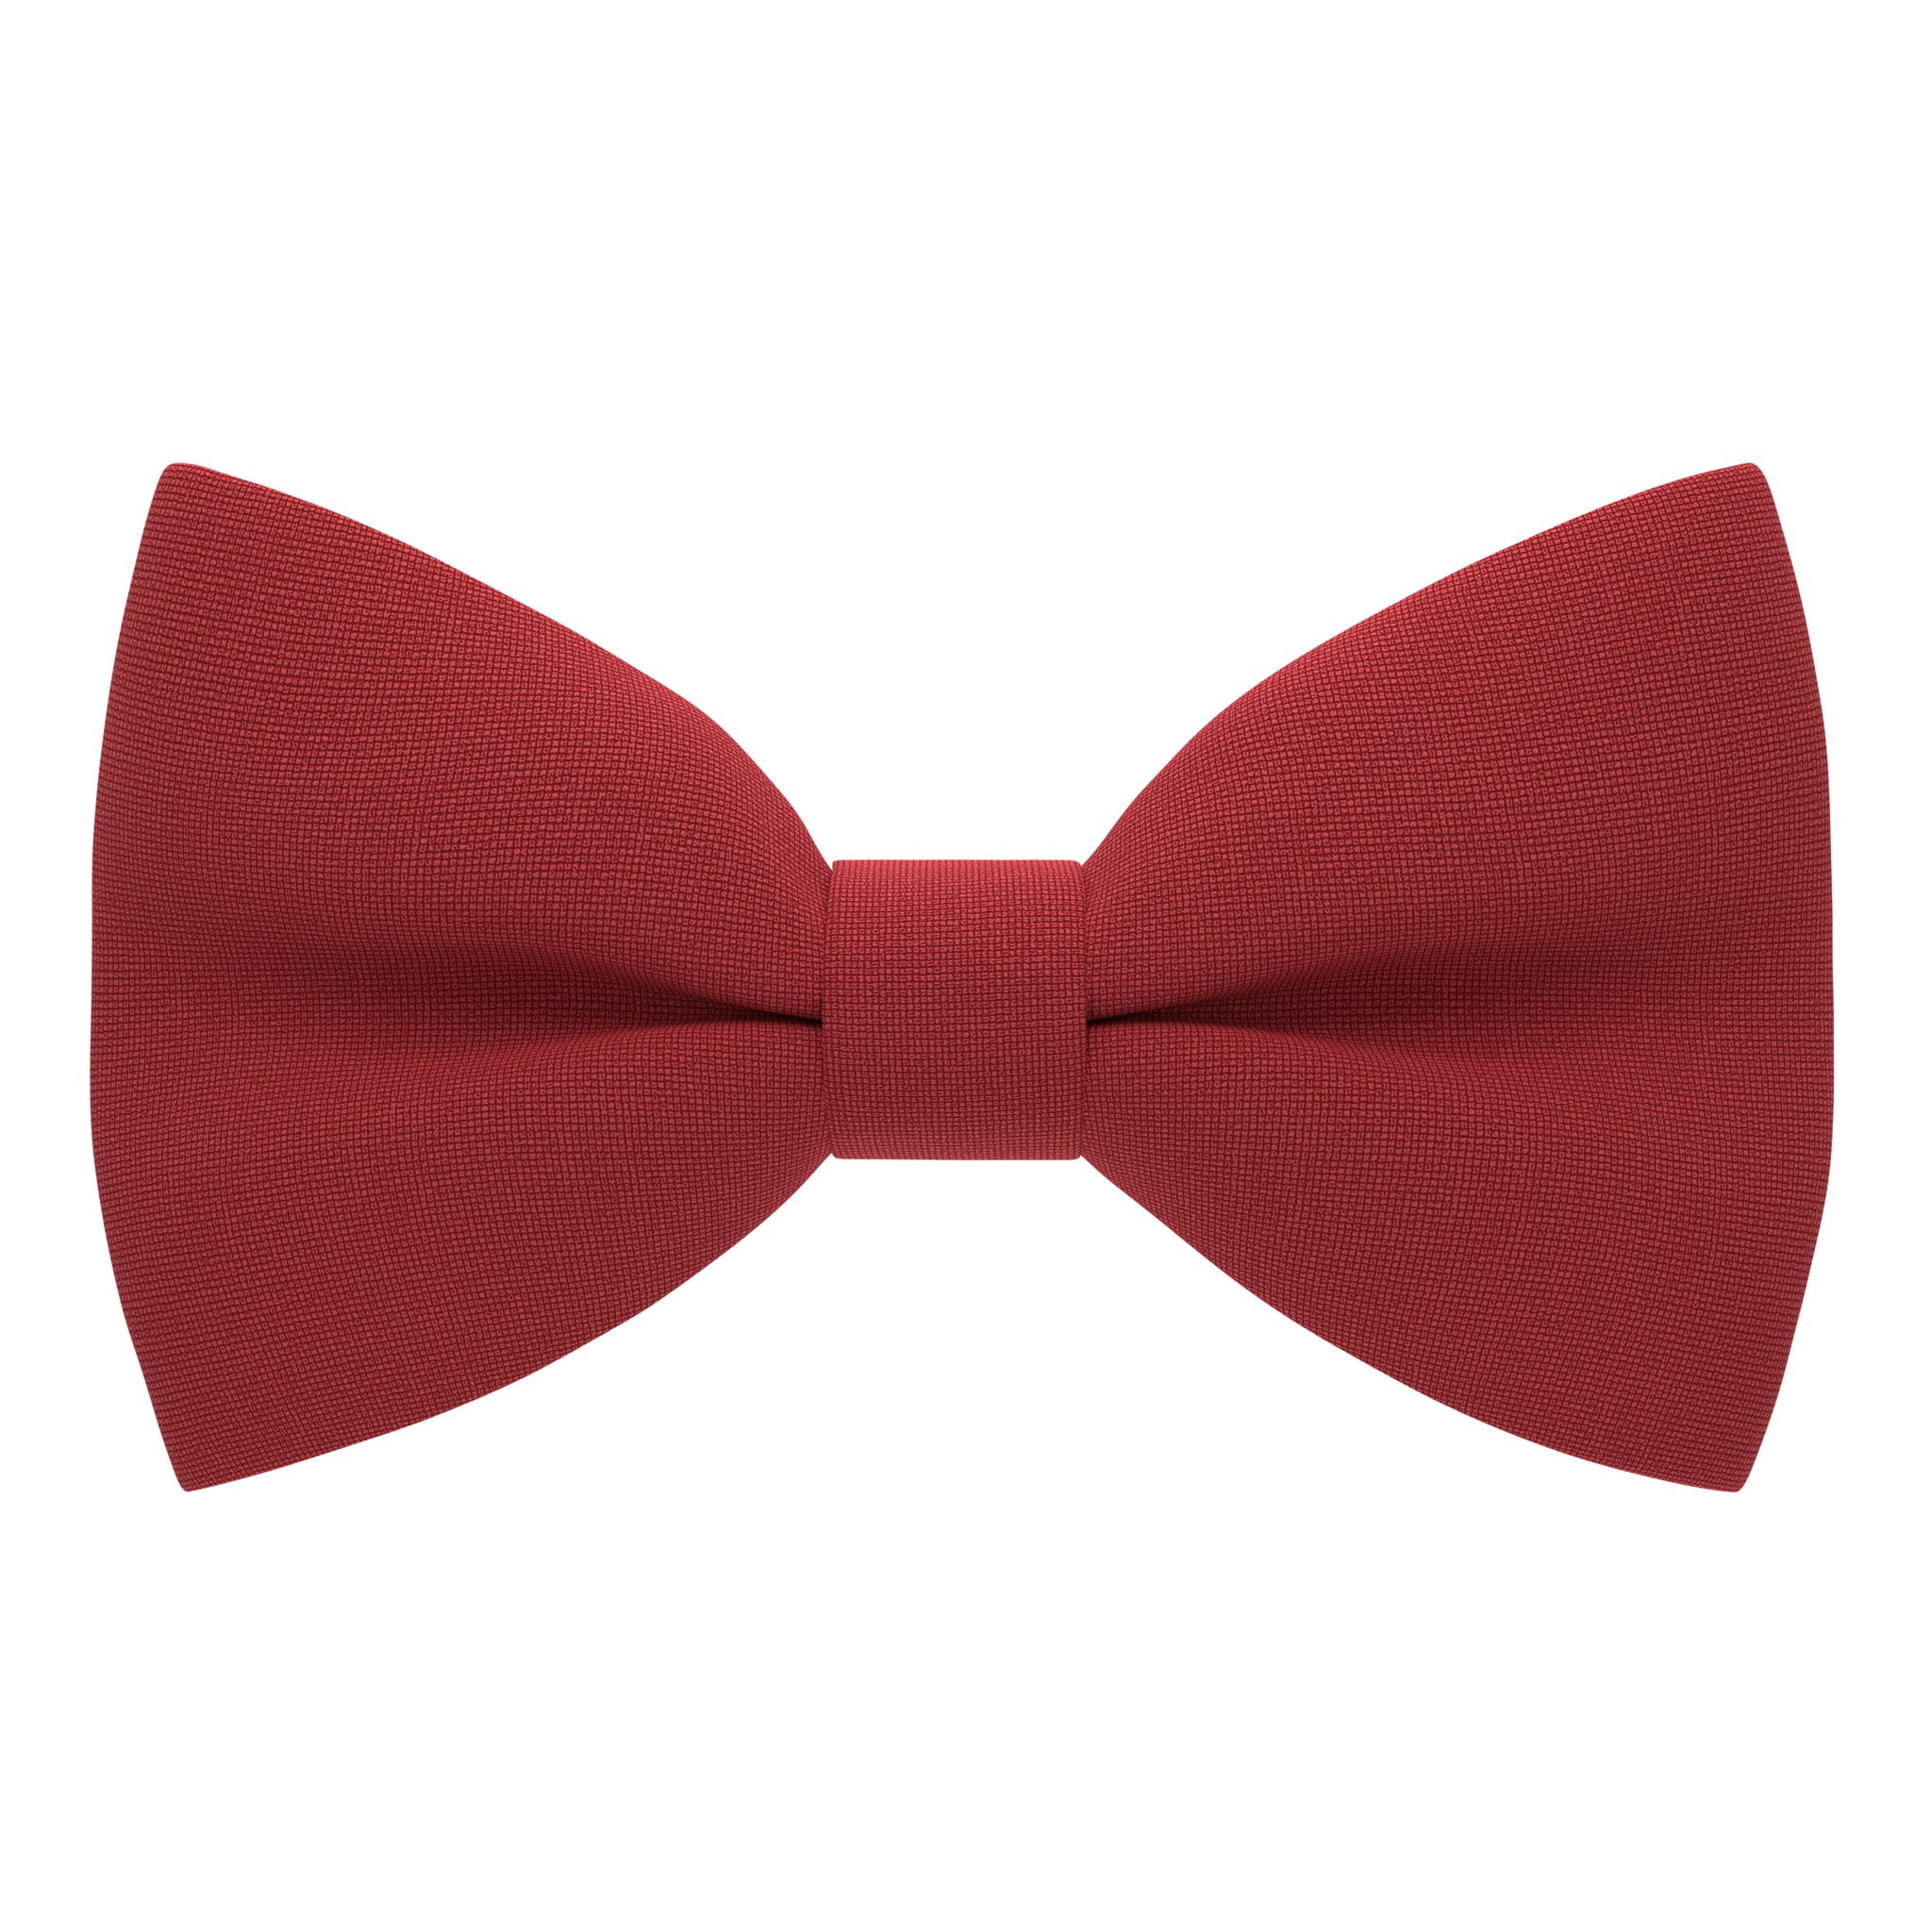 Many others to choose from in my shop! Vintage Mens Red Colorful Silk Bow Tie Bowtie Neck Tie Adjustable